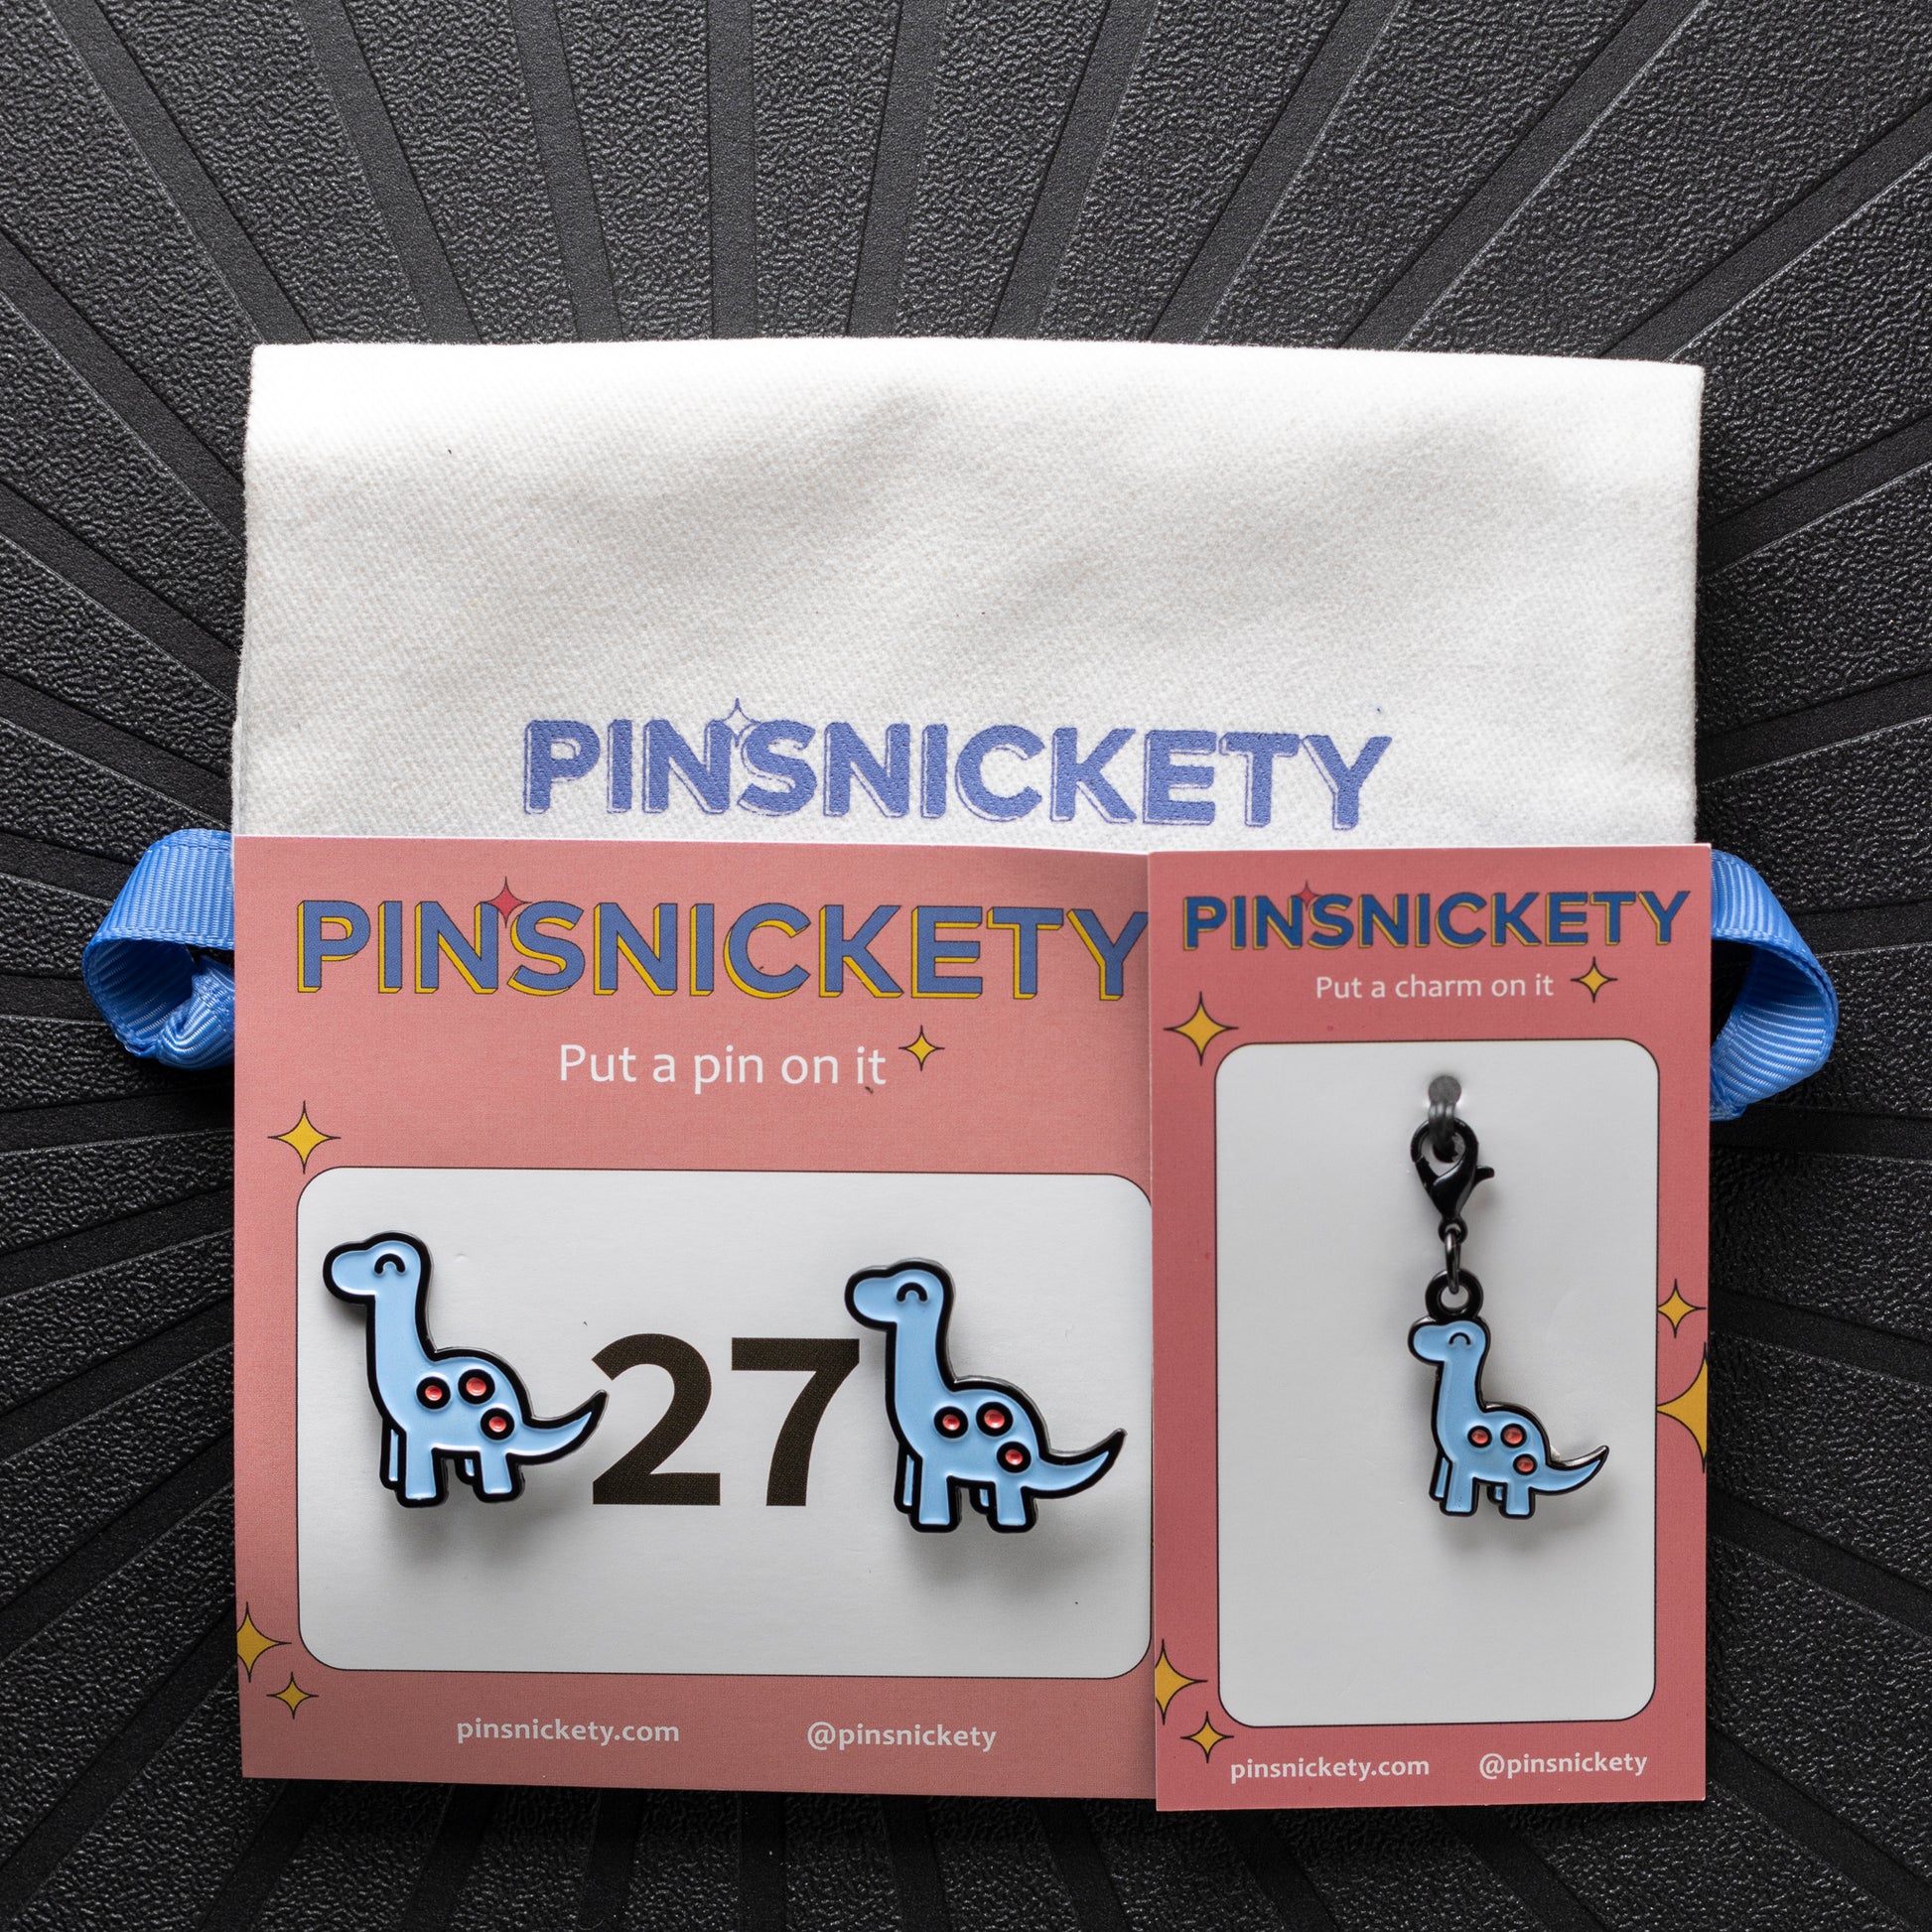 pinsnickety brontosaurus horse show number pins and braid and bridle charm with a pinsnickety twill bag as a matching set